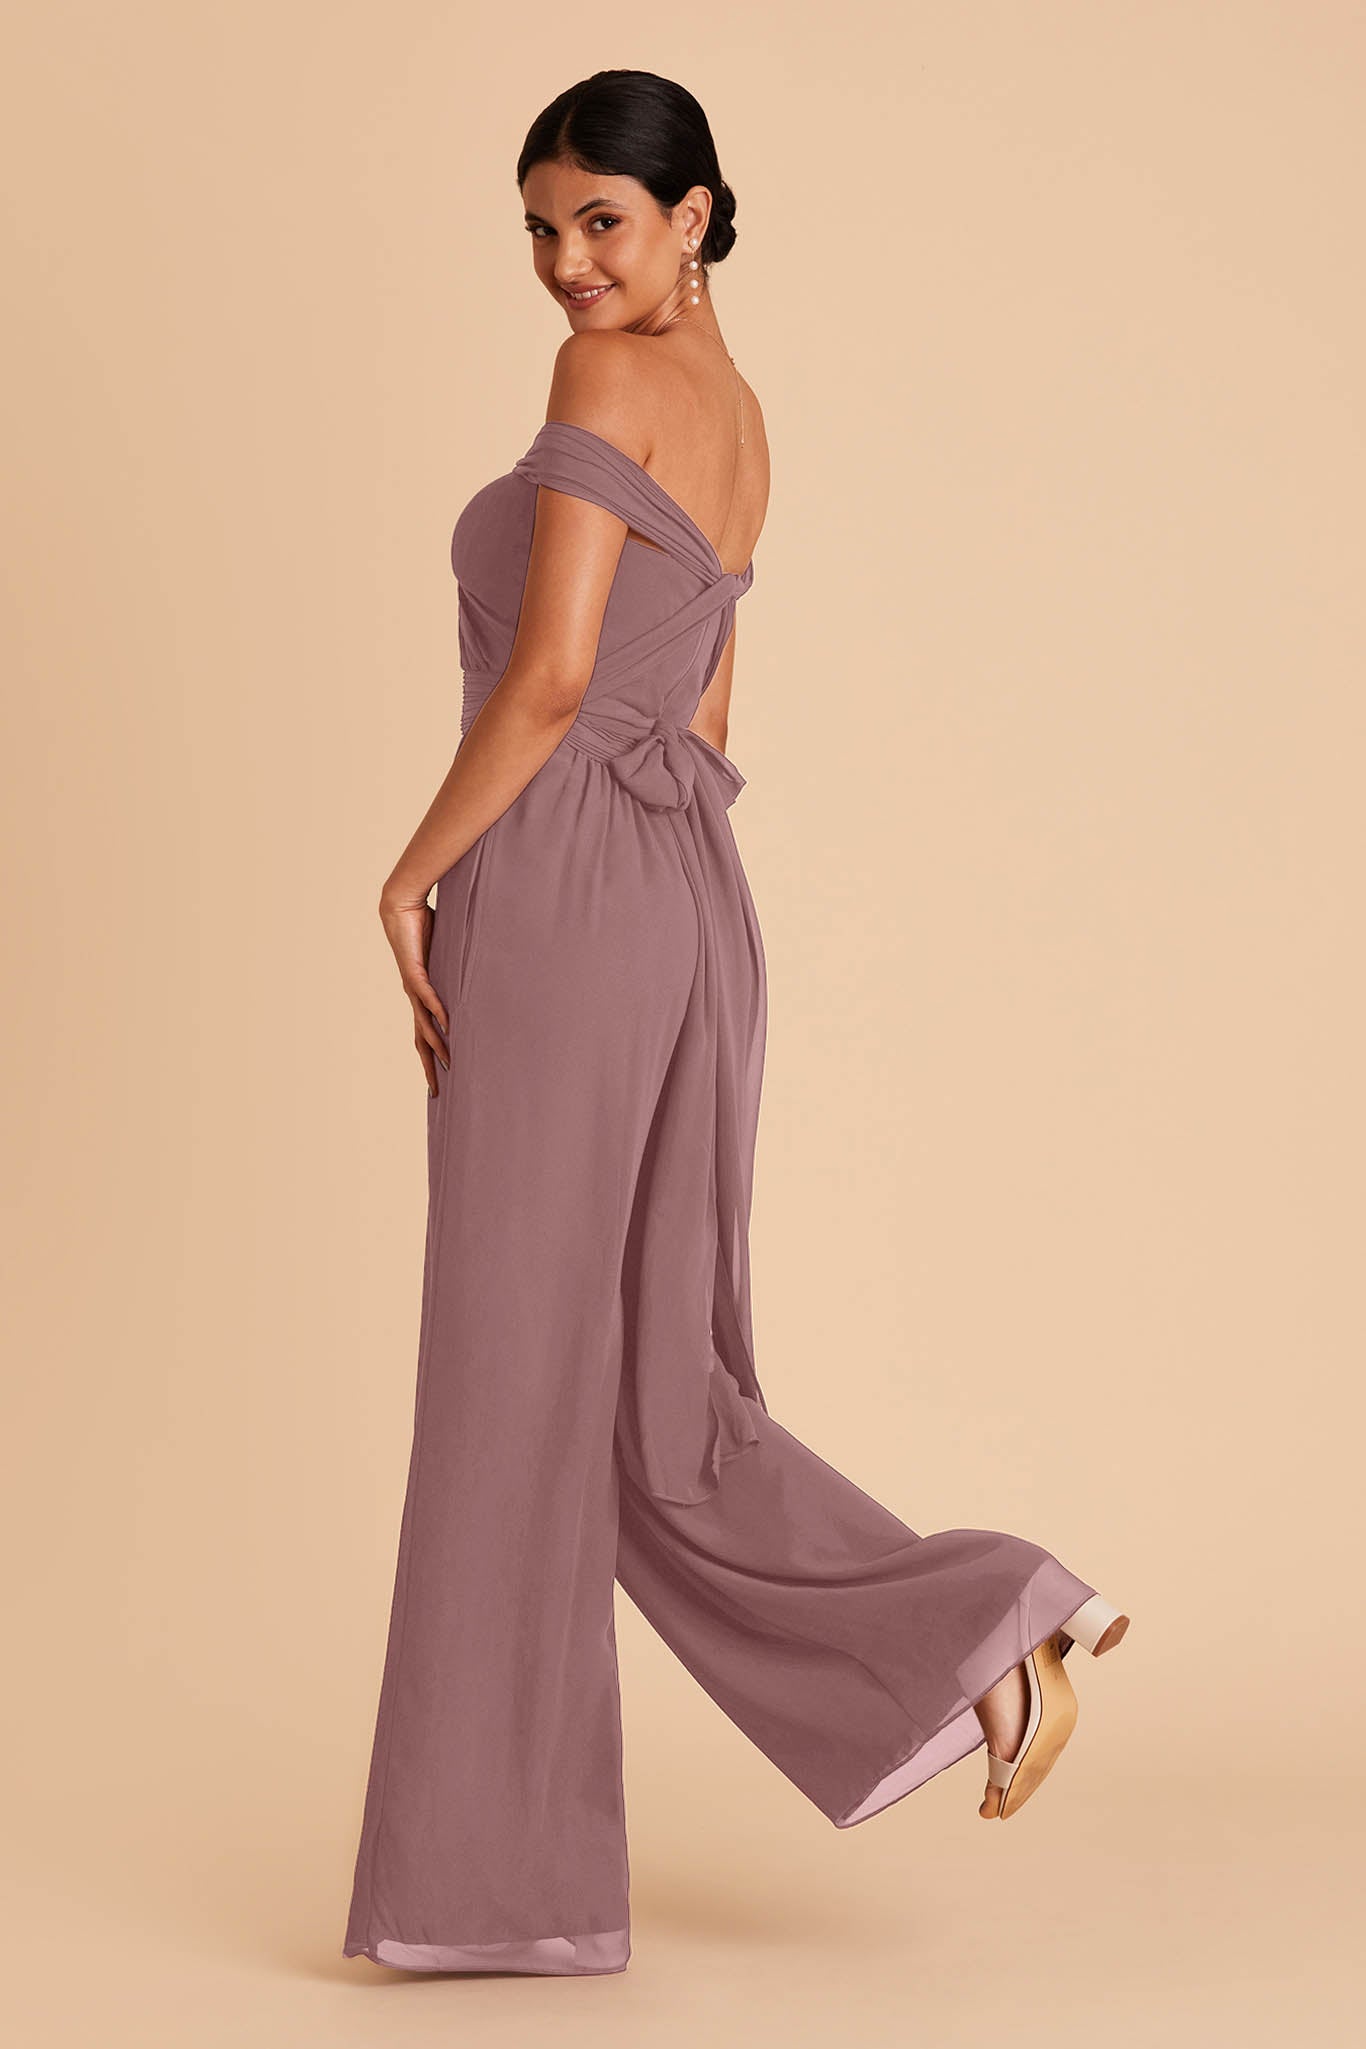 medium purple wedding jumpsuit with sweetheart bodice with convertible neckline and tie in the back